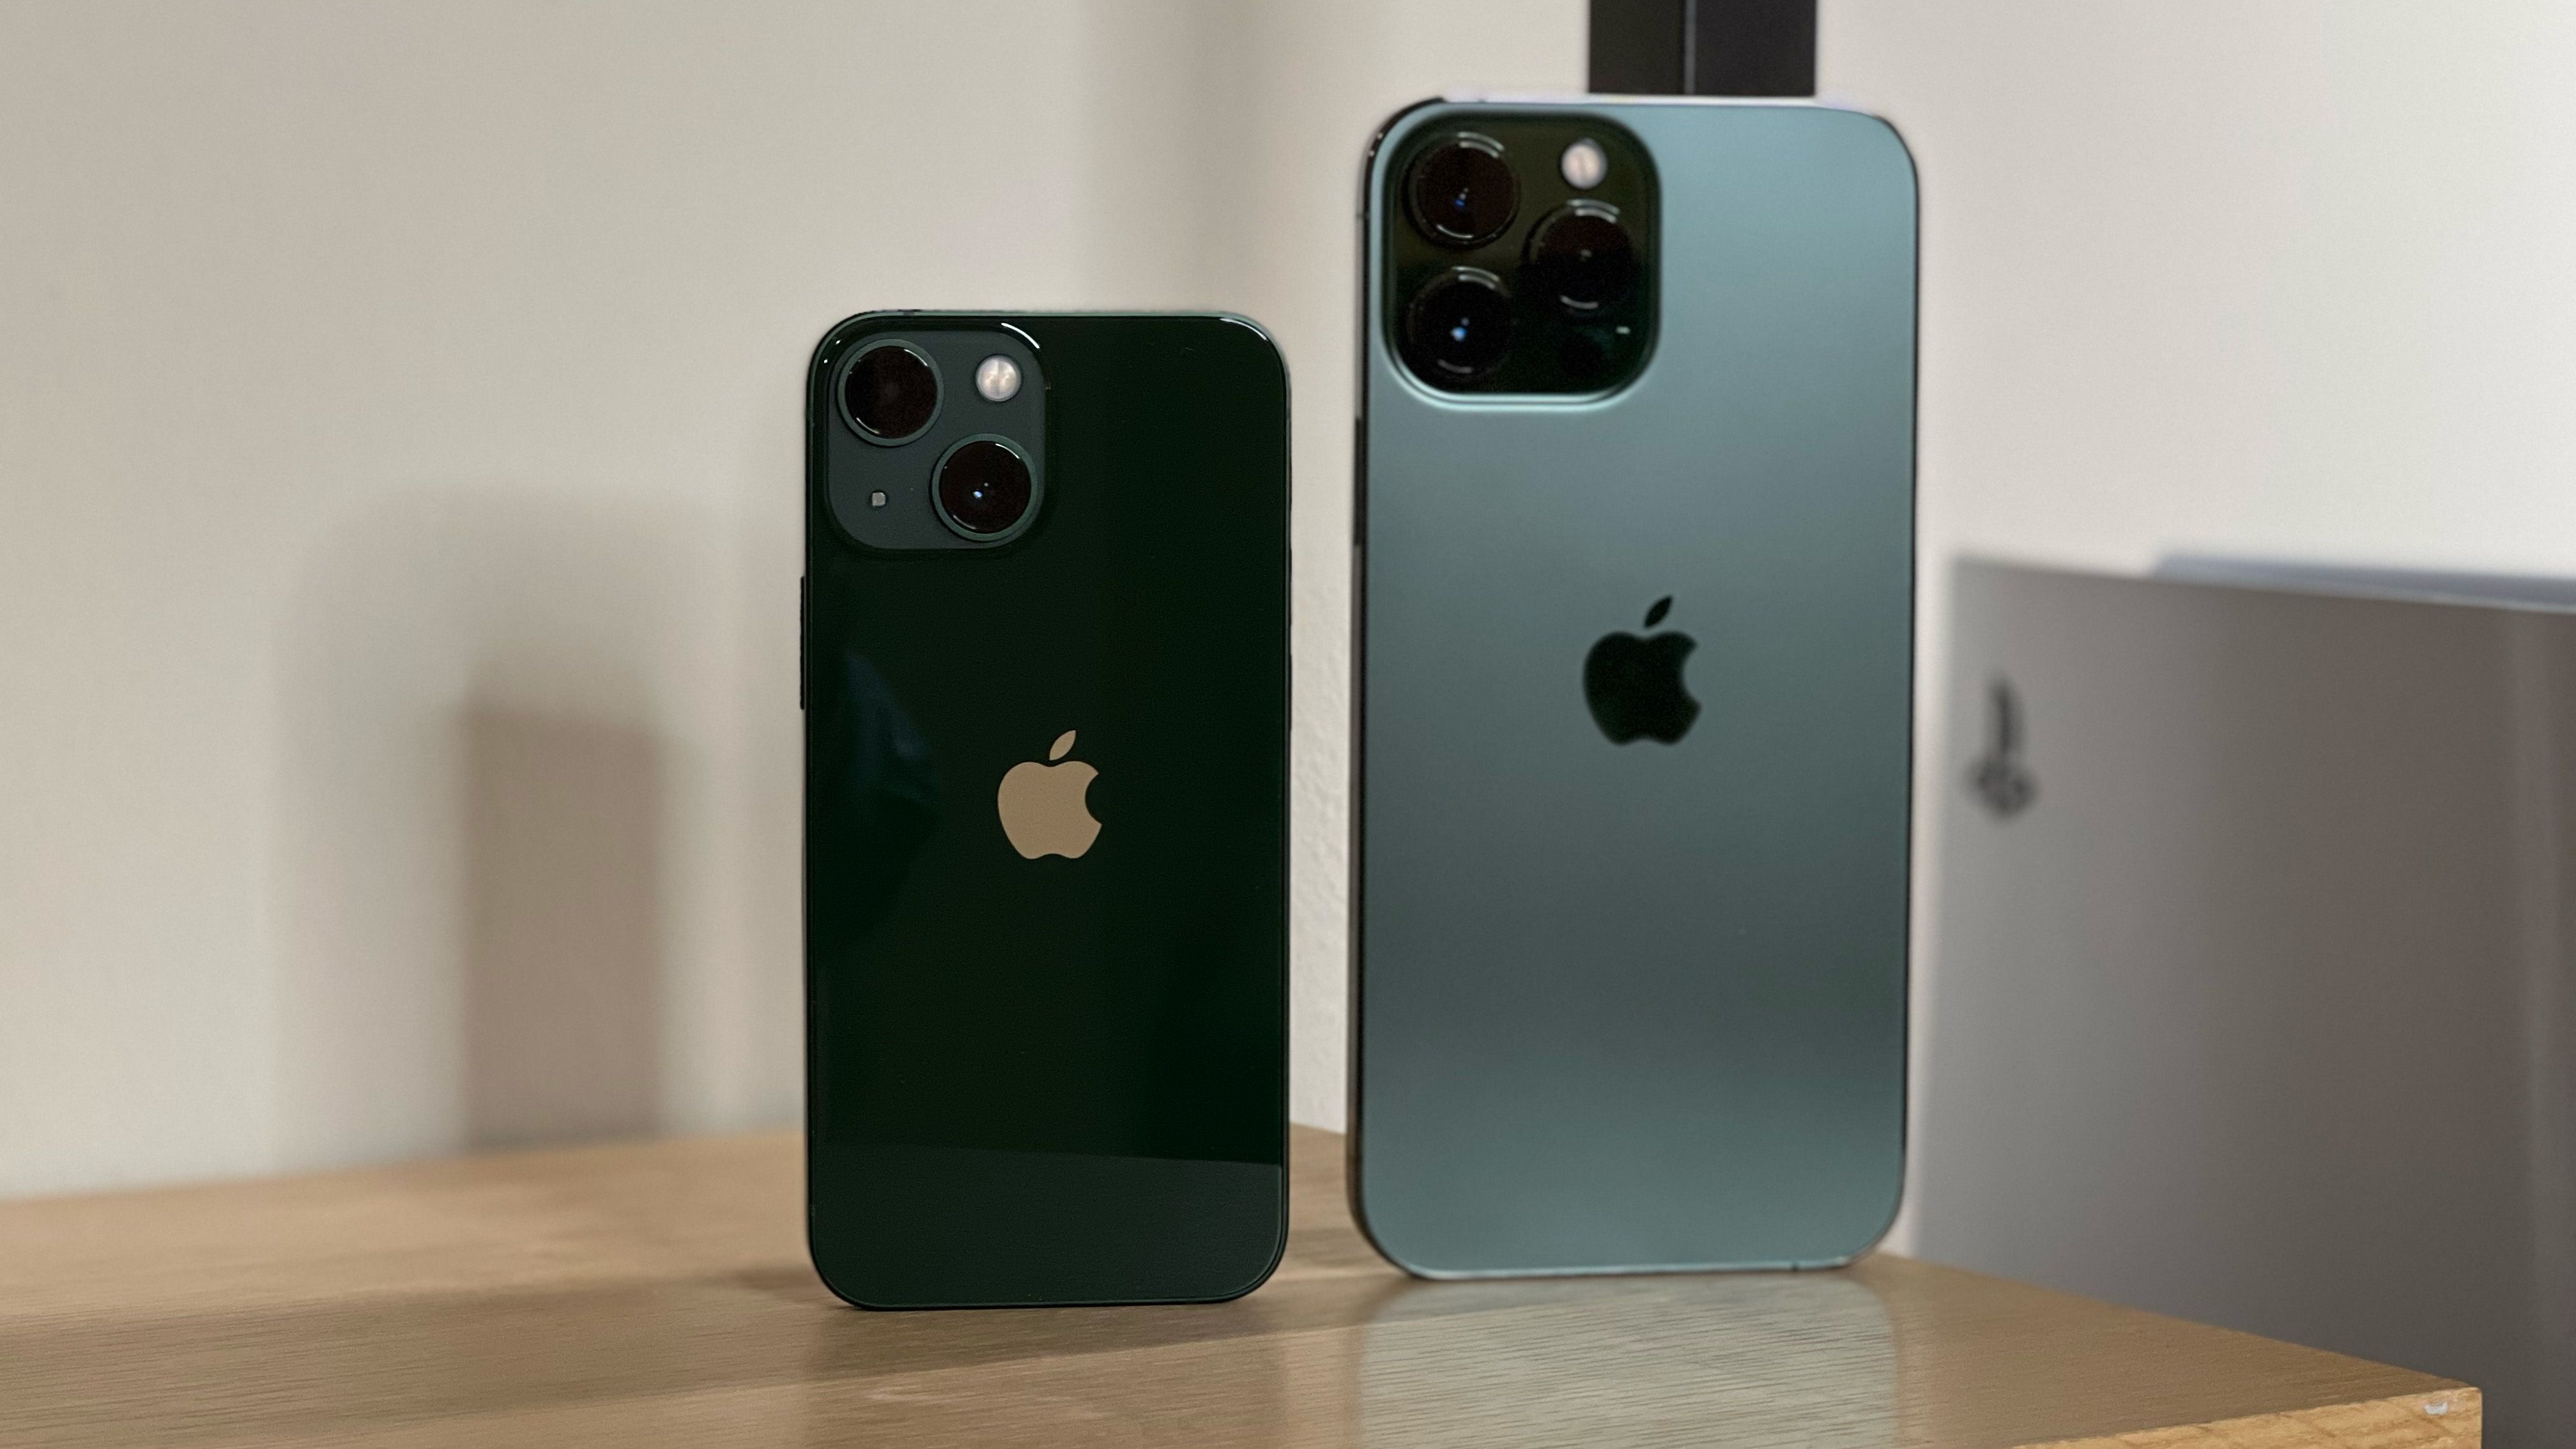 Apple iPhone 13 Pro Max pictures, official photos